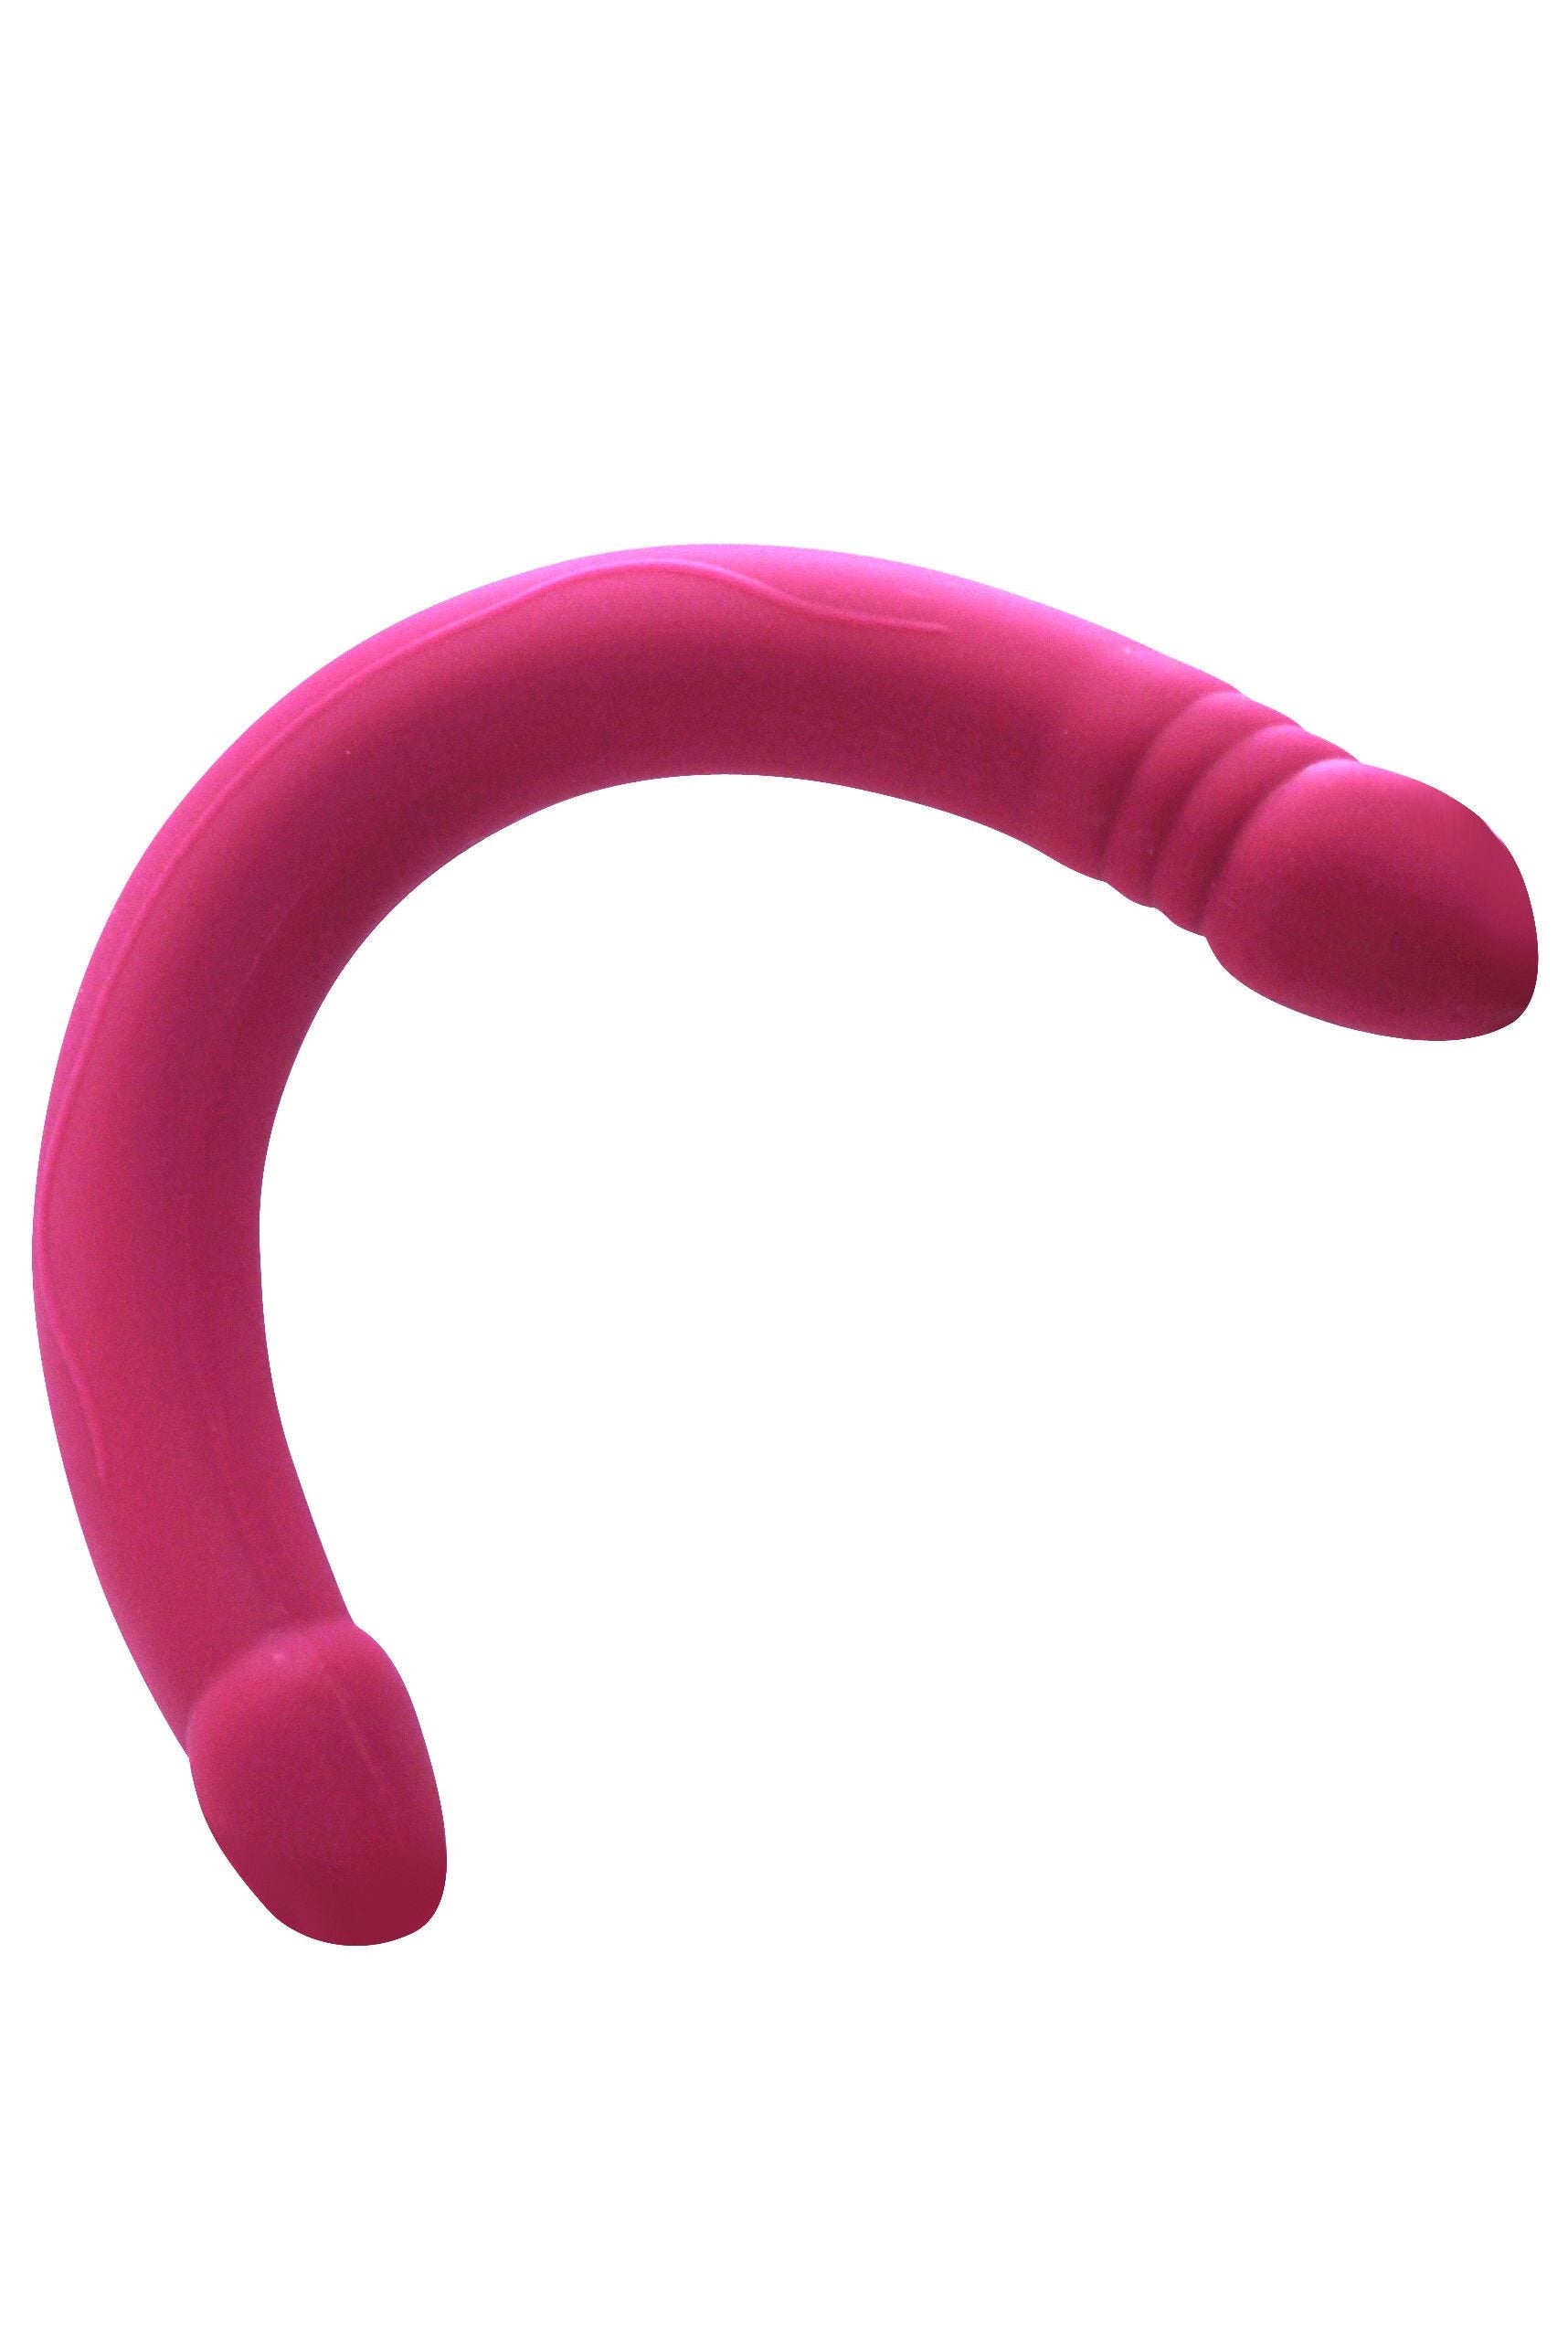 Double Dong DORCEL Real Double Do 42cm [sextoys]